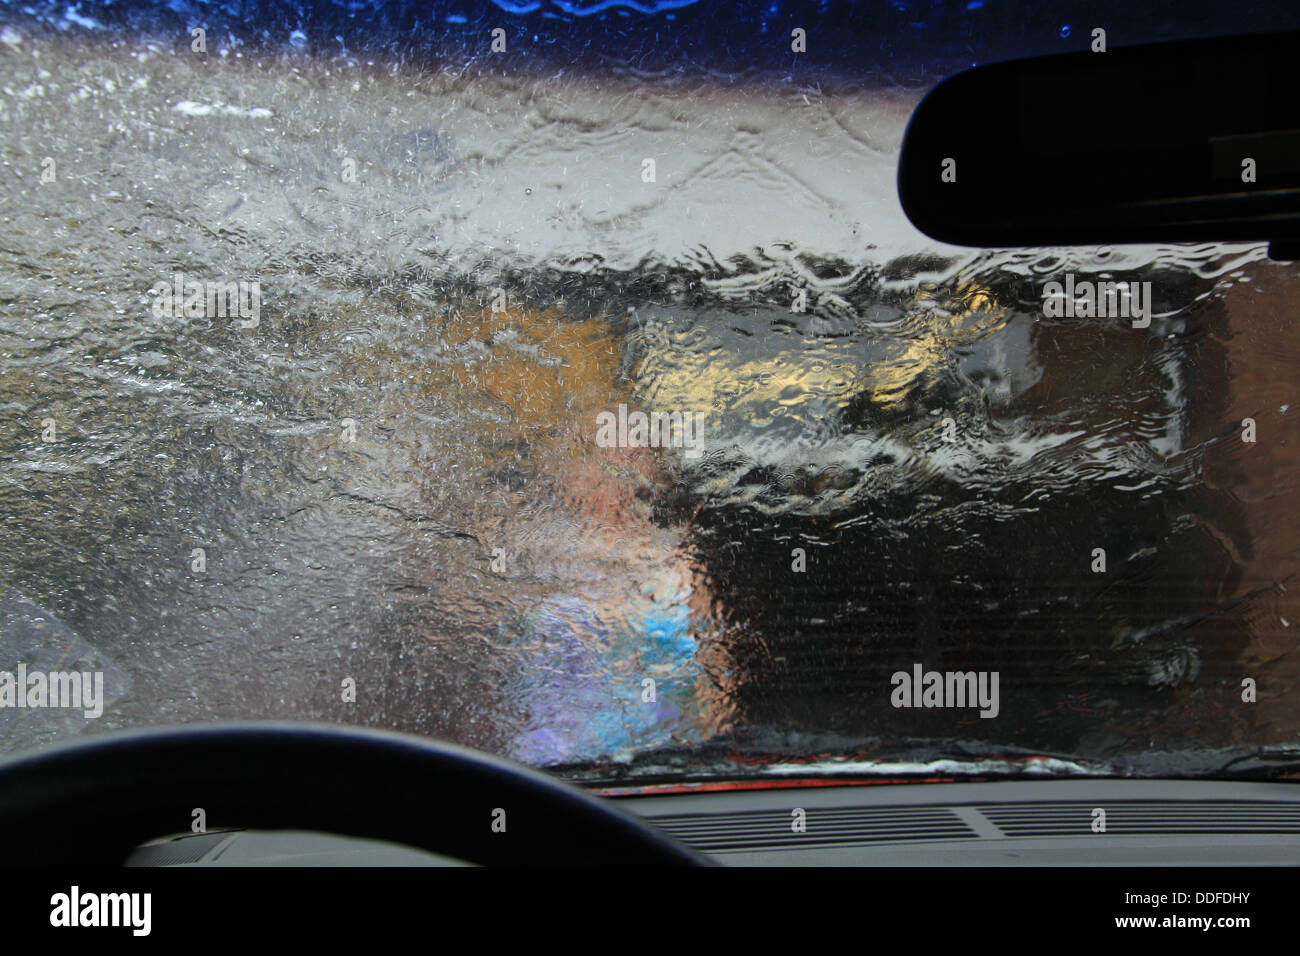 Soap suds on car window in car wash, view from inside Stock Photo